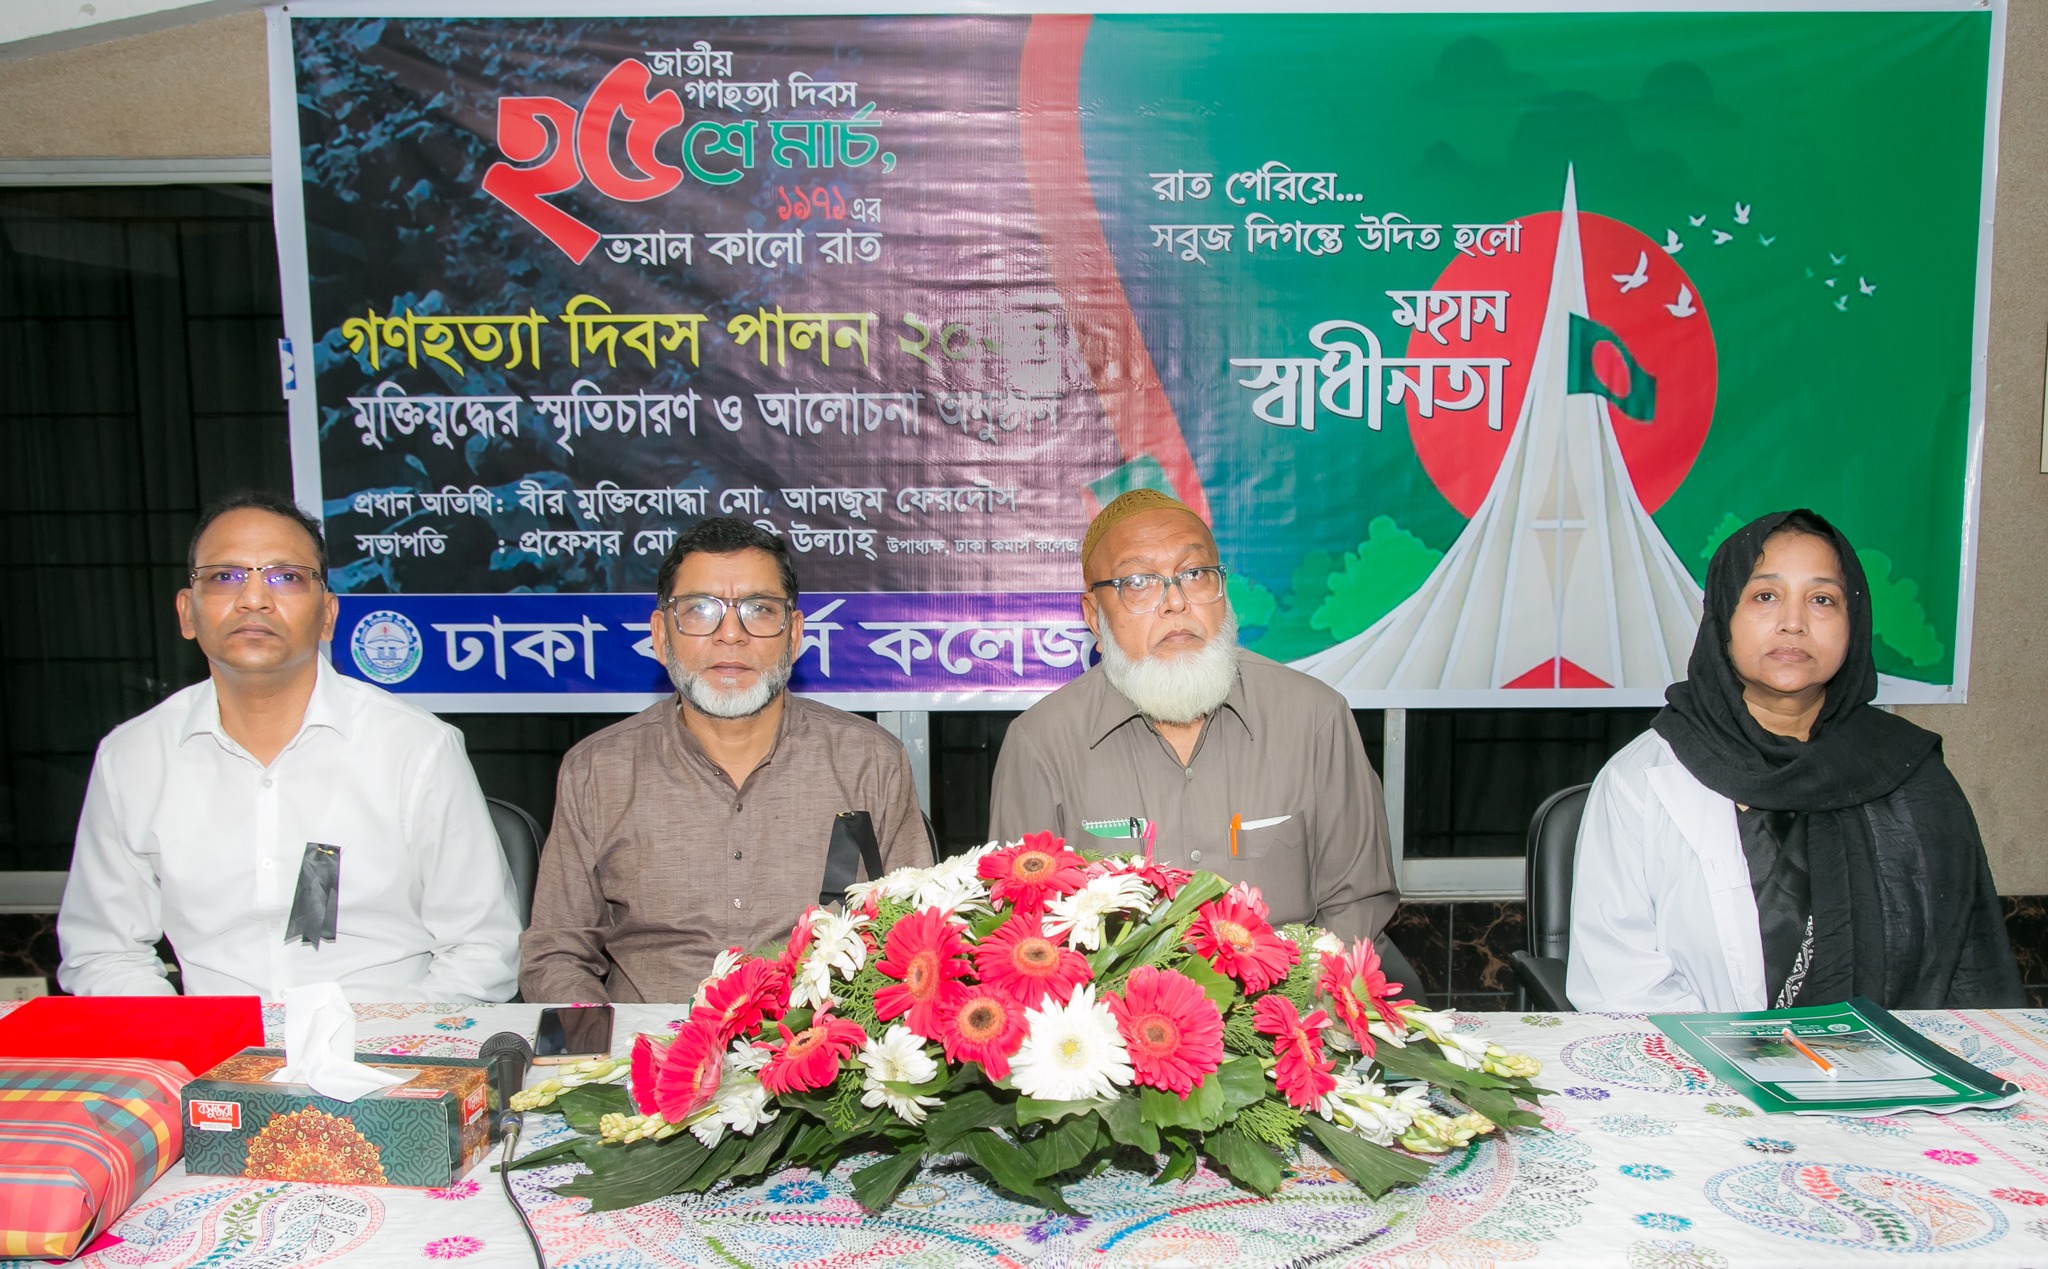 Dhaka Commerce College Observed the Genocide Day